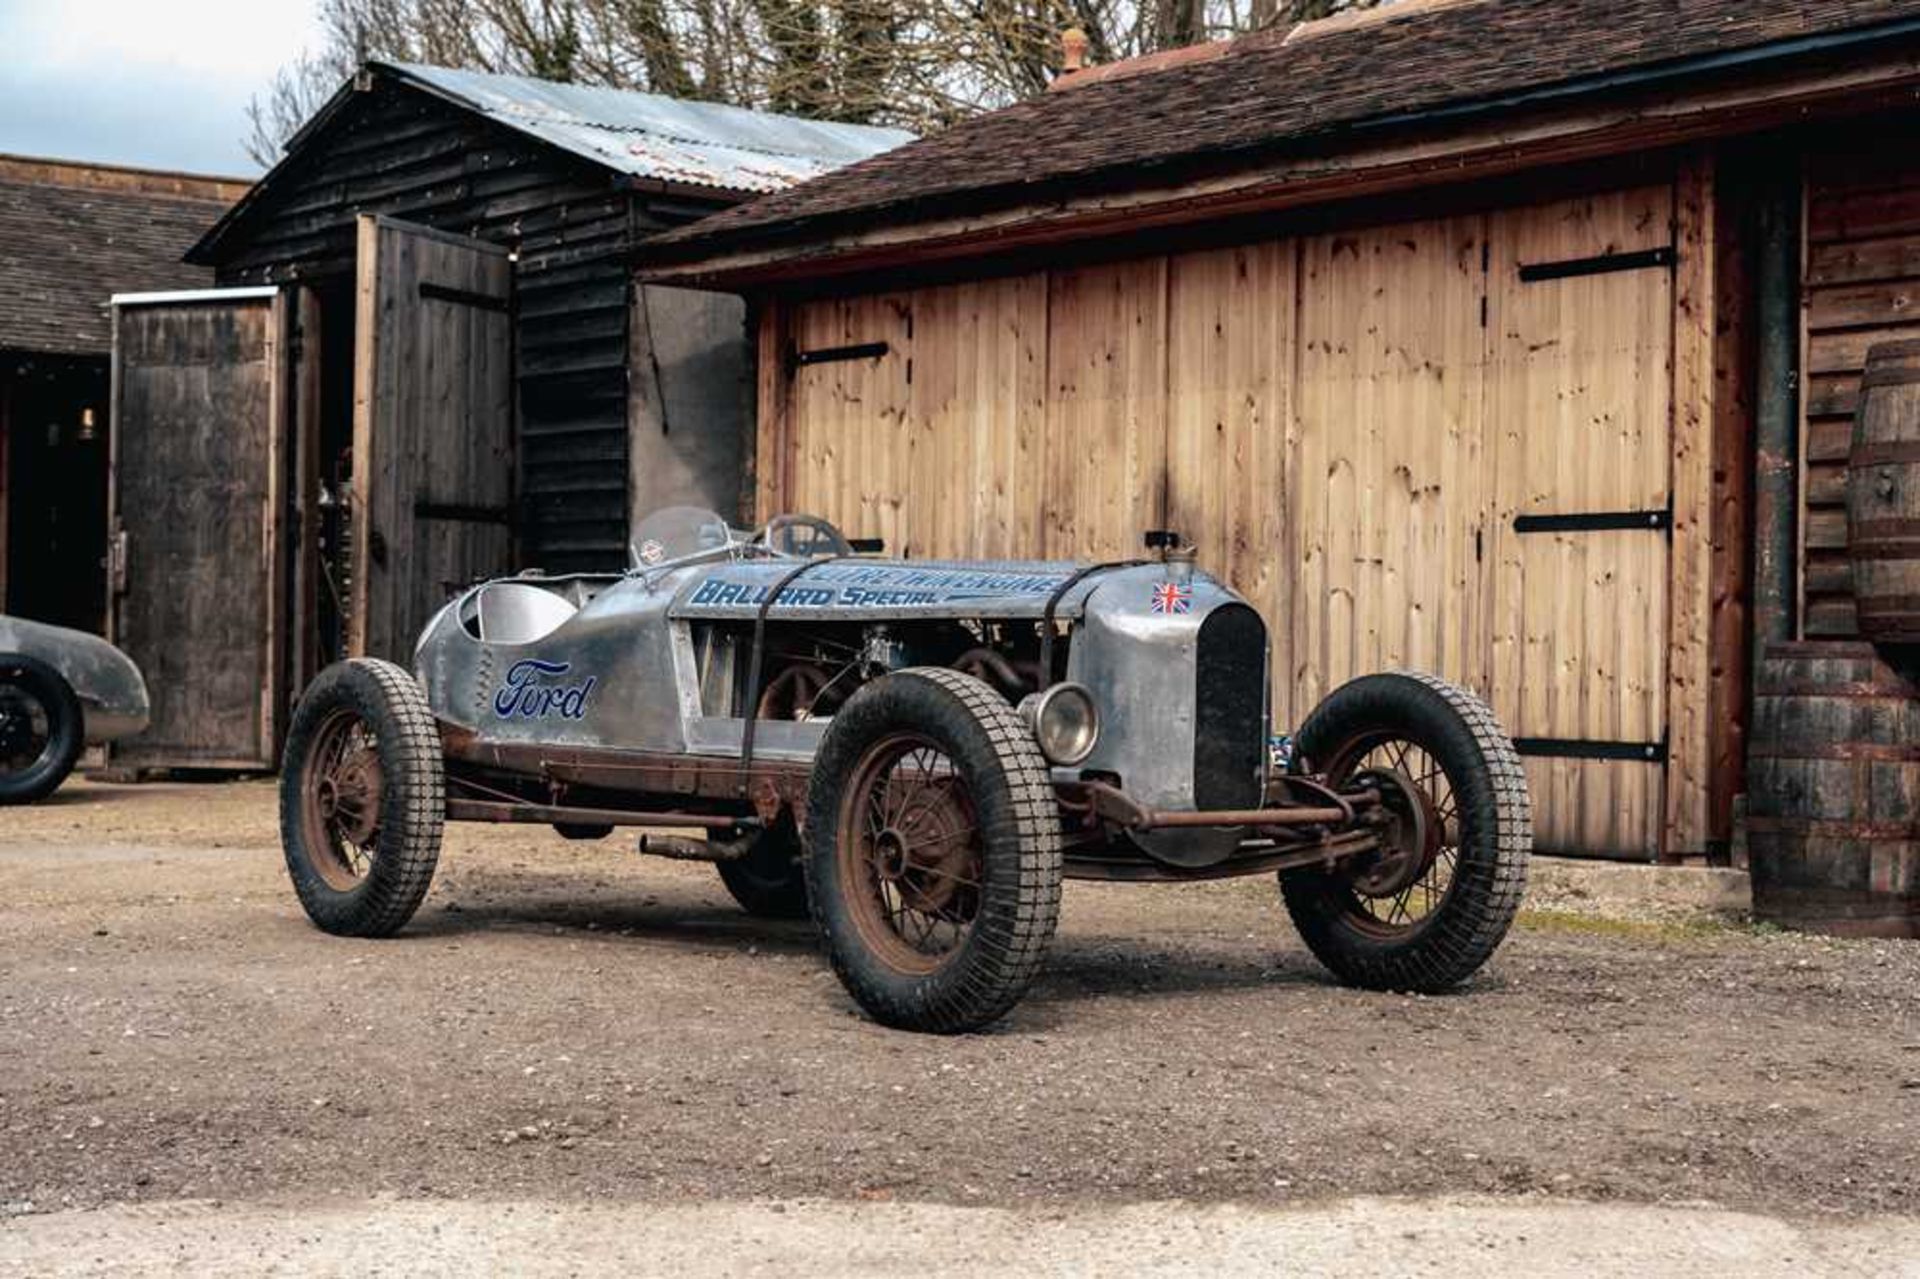 1930 Ford Model A "The Ballard Special" Speedster One off, bespoke built twin-engined pre-war racing